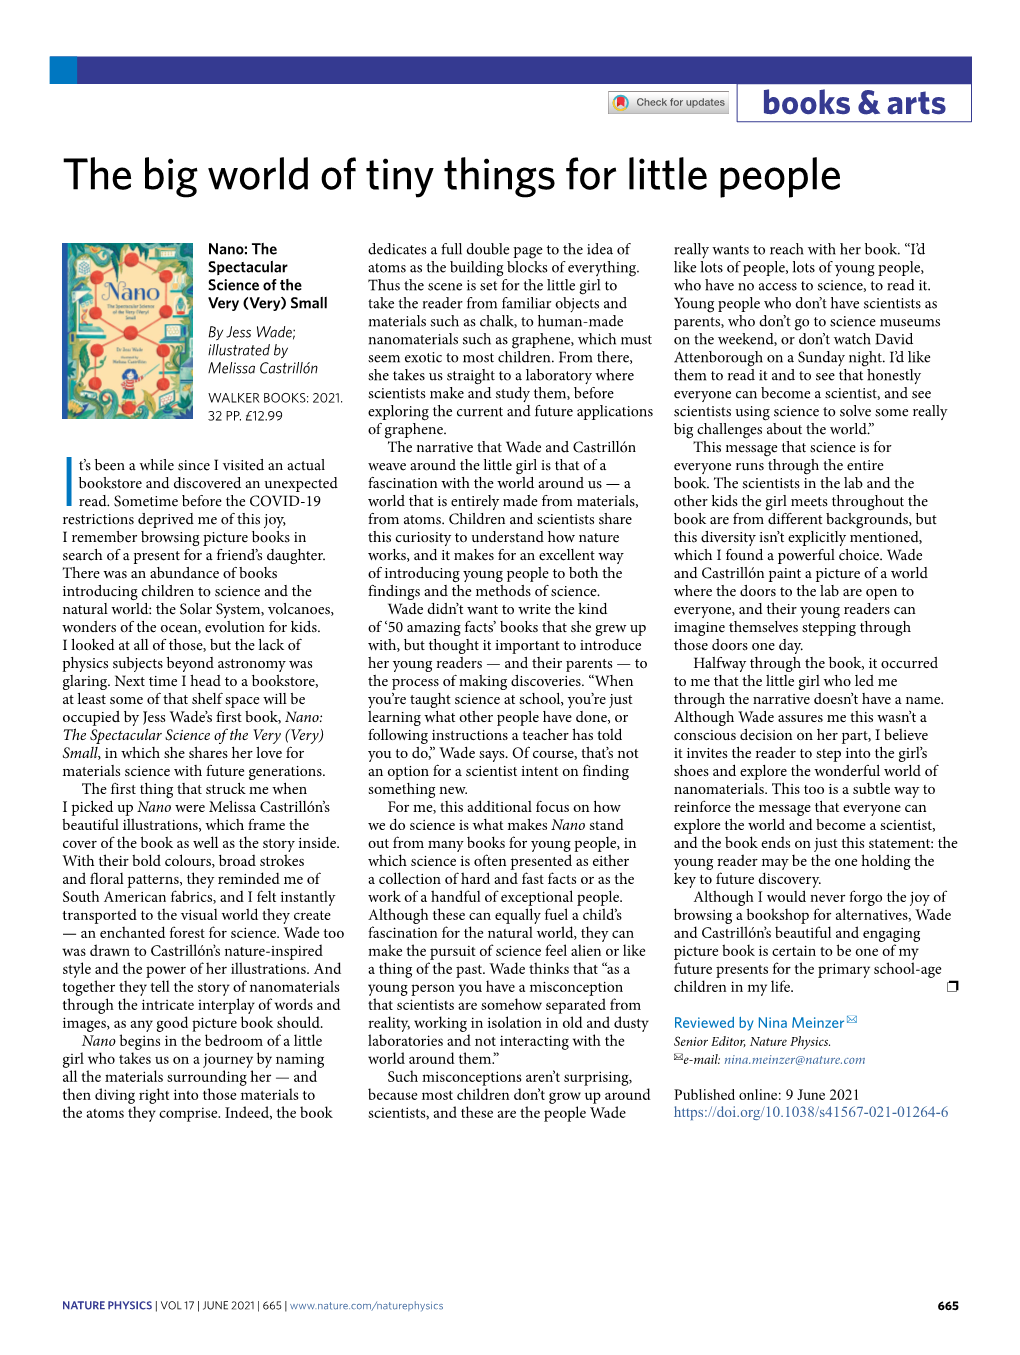 The Big World of Tiny Things for Little People